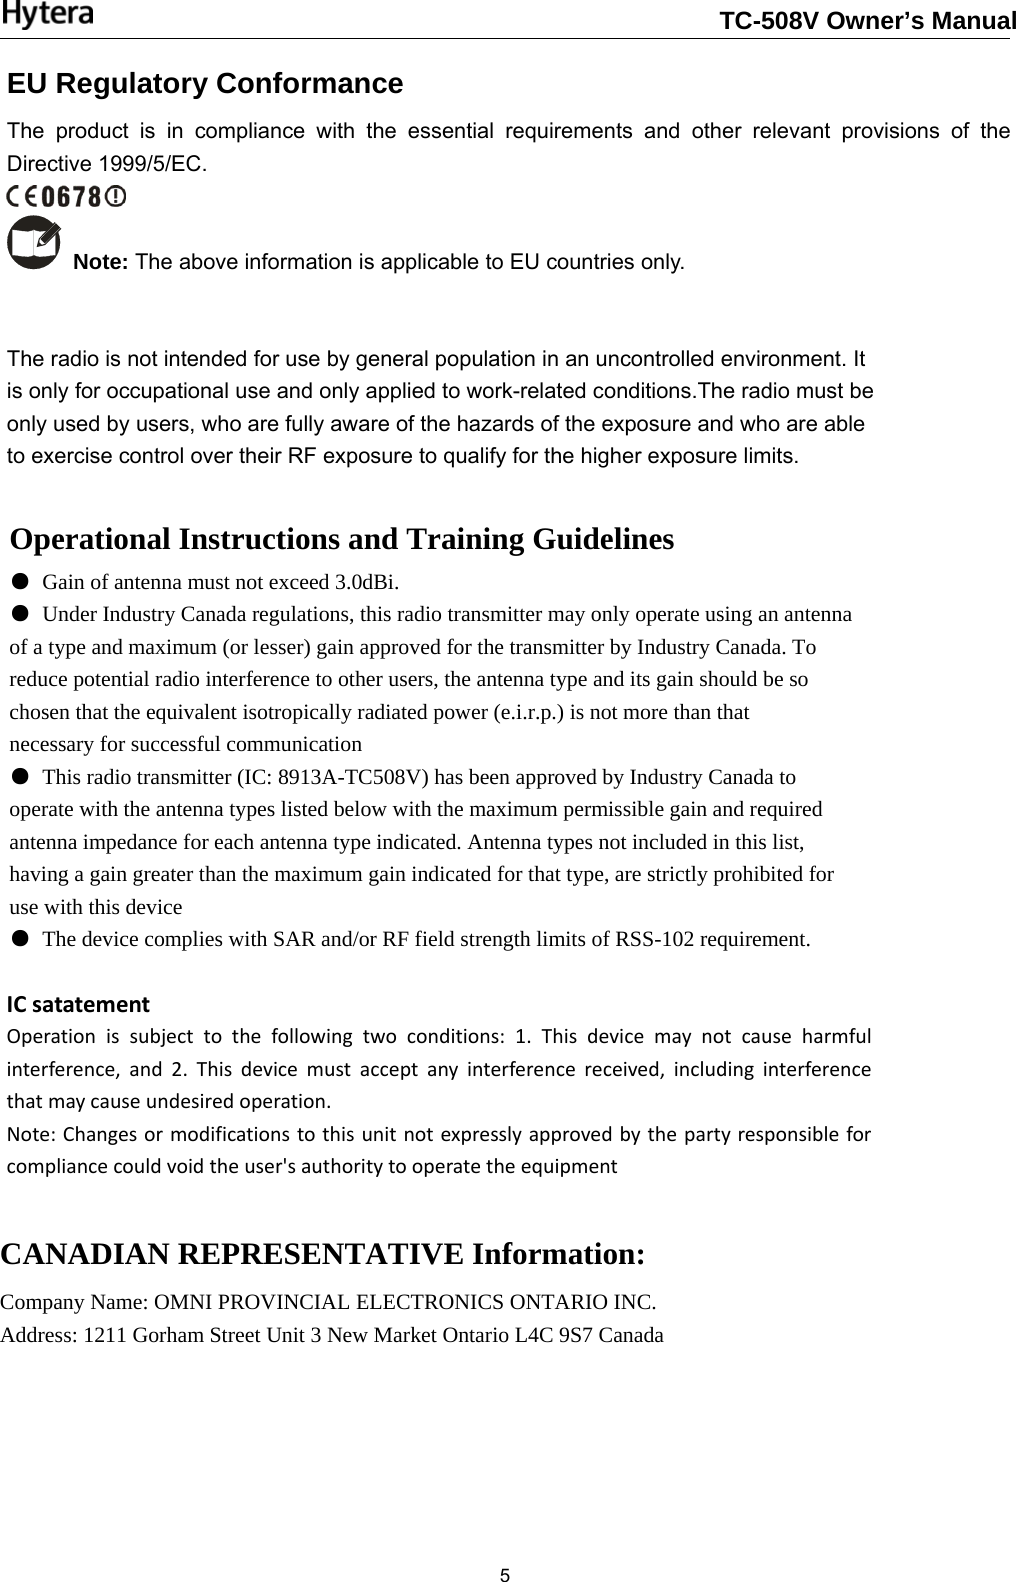                                                                       5 Operational Instructions and Training Guidelines ● Gain of antenna must not exceed 3.0dBi. ● Under Industry Canada regulations, this radio transmitter may only operate using an antenna of a type and maximum (or lesser) gain approved for the transmitter by Industry Canada. To reduce potential radio interference to other users, the antenna type and its gain should be so chosen that the equivalent isotropically radiated power (e.i.r.p.) is not more than that necessary for successful communication ● This radio transmitter (IC: 8913A-TC508V) has been approved by Industry Canada to operate with the antenna types listed below with the maximum permissible gain and required antenna impedance for each antenna type indicated. Antenna types not included in this list, having a gain greater than the maximum gain indicated for that type, are strictly prohibited for use with this device ● The device complies with SAR and/or RF field strength limits of RSS-102 requirement. CANADIAN REPRESENTATIVE Information: Company Name: OMNI PROVINCIAL ELECTRONICS ONTARIO INC. Address: 1211 Gorham Street Unit 3 New Market Ontario L4C 9S7 Canada ICsatatementOperationissubjecttothefollowingtwoconditions:1.Thisdevicemaynotcauseharmfulinterference,and2.Thisdevicemustacceptanyinterferencereceived,includinginterferencethatmaycauseundesiredoperation.Note:Changesormodificationstothisunitnotexpresslyapprovedbythepartyresponsibleforcompliancecouldvoidtheuser&apos;sauthoritytooperatetheequipmentEU Regulatory Conformance The product is in compliance with the essential requirements and other relevant provisions of the Directive 1999/5/EC.  Note: The above information is applicable to EU countries only. The radio is not intended for use by general population in an uncontrolled environment. It is only for occupational use and only applied to work-related conditions.The radio must be only used by users, who are fully aware of the hazards of the exposure and who are able to exercise control over their RF exposure to qualify for the higher exposure limits.TC-508V Owner’s Manual